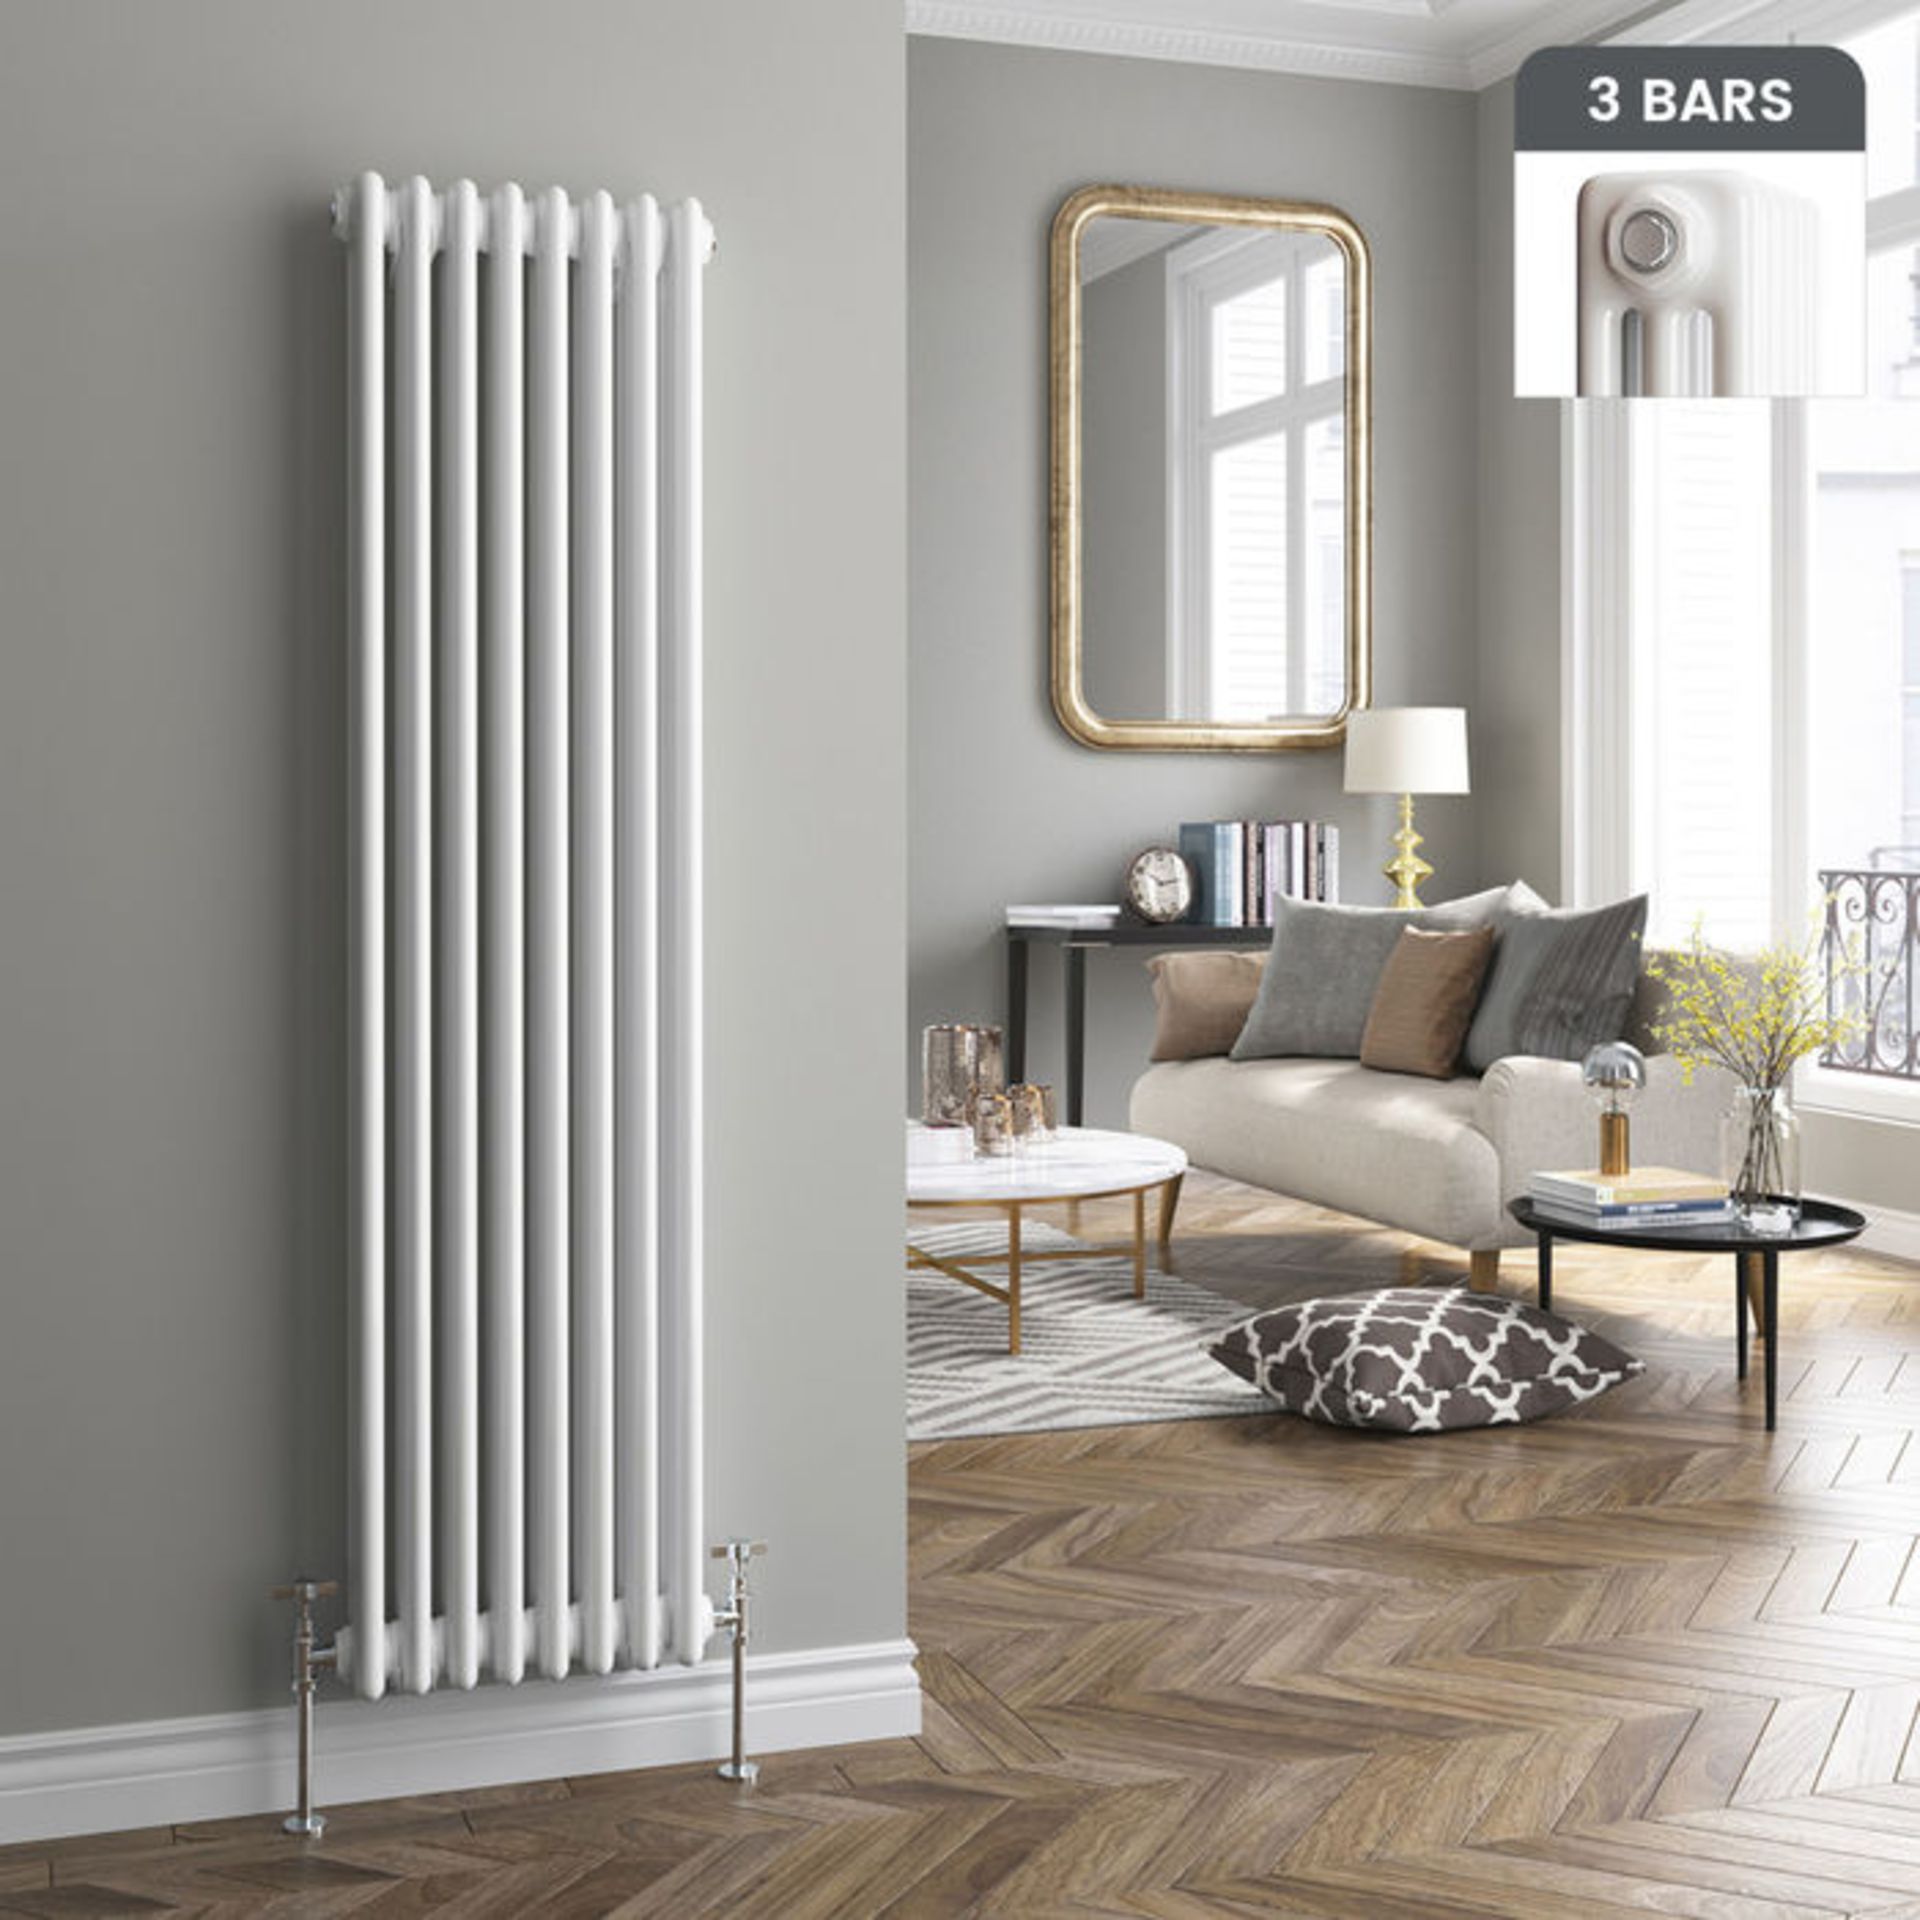 (ZZ118) 1500x380mm White Triple Panel Vertical Colosseum Traditional Radiator. RRP £289.99. Made - Image 3 of 3